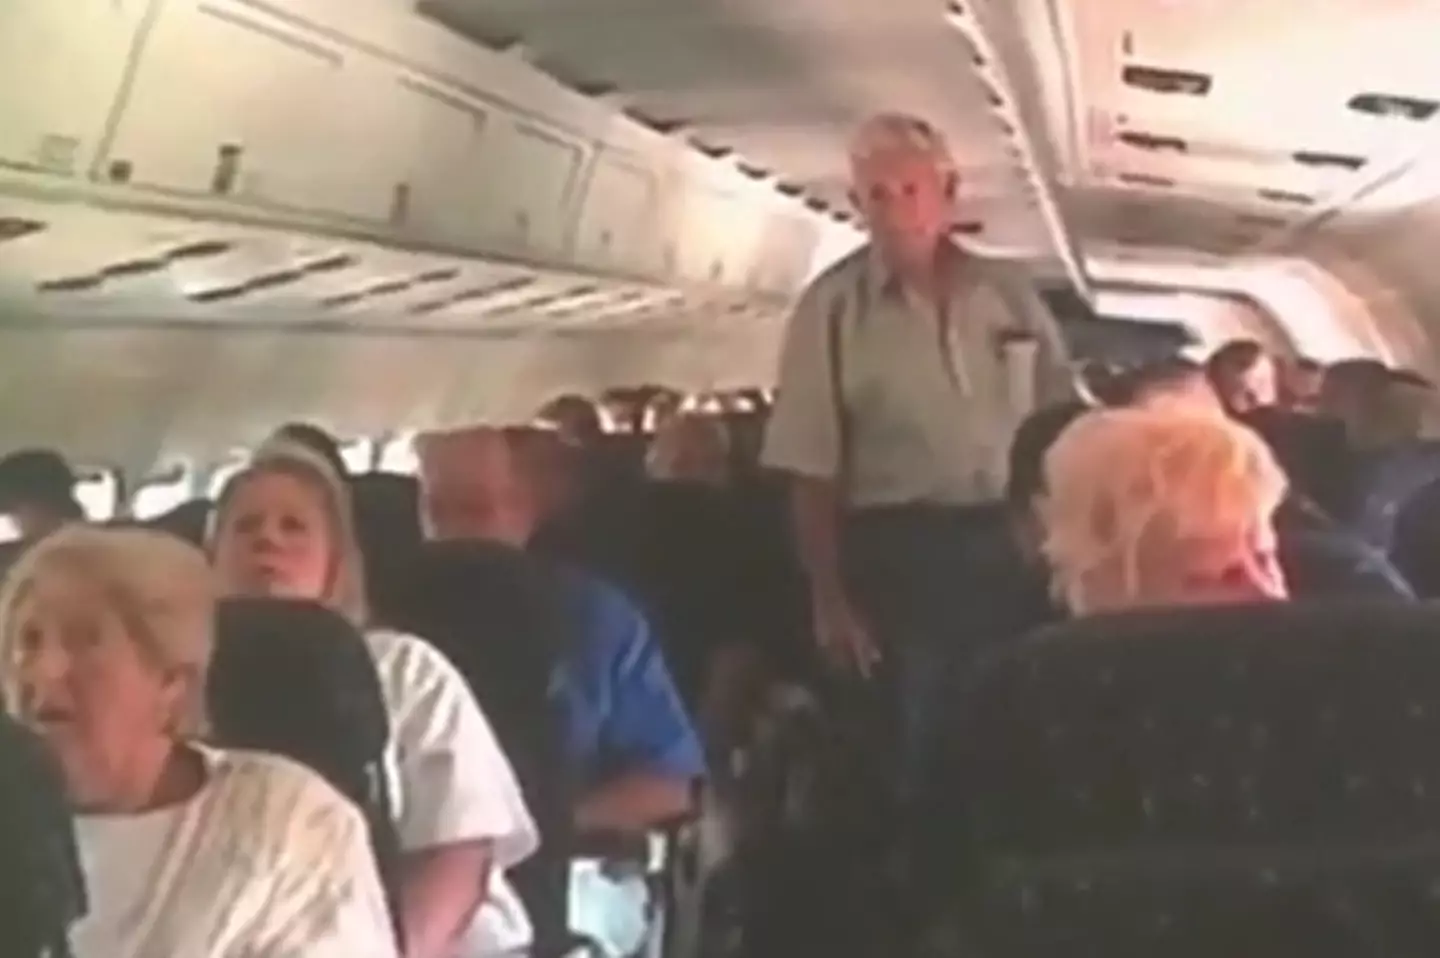 The plane passengers listened with horror at the news of the terrorist attacks.